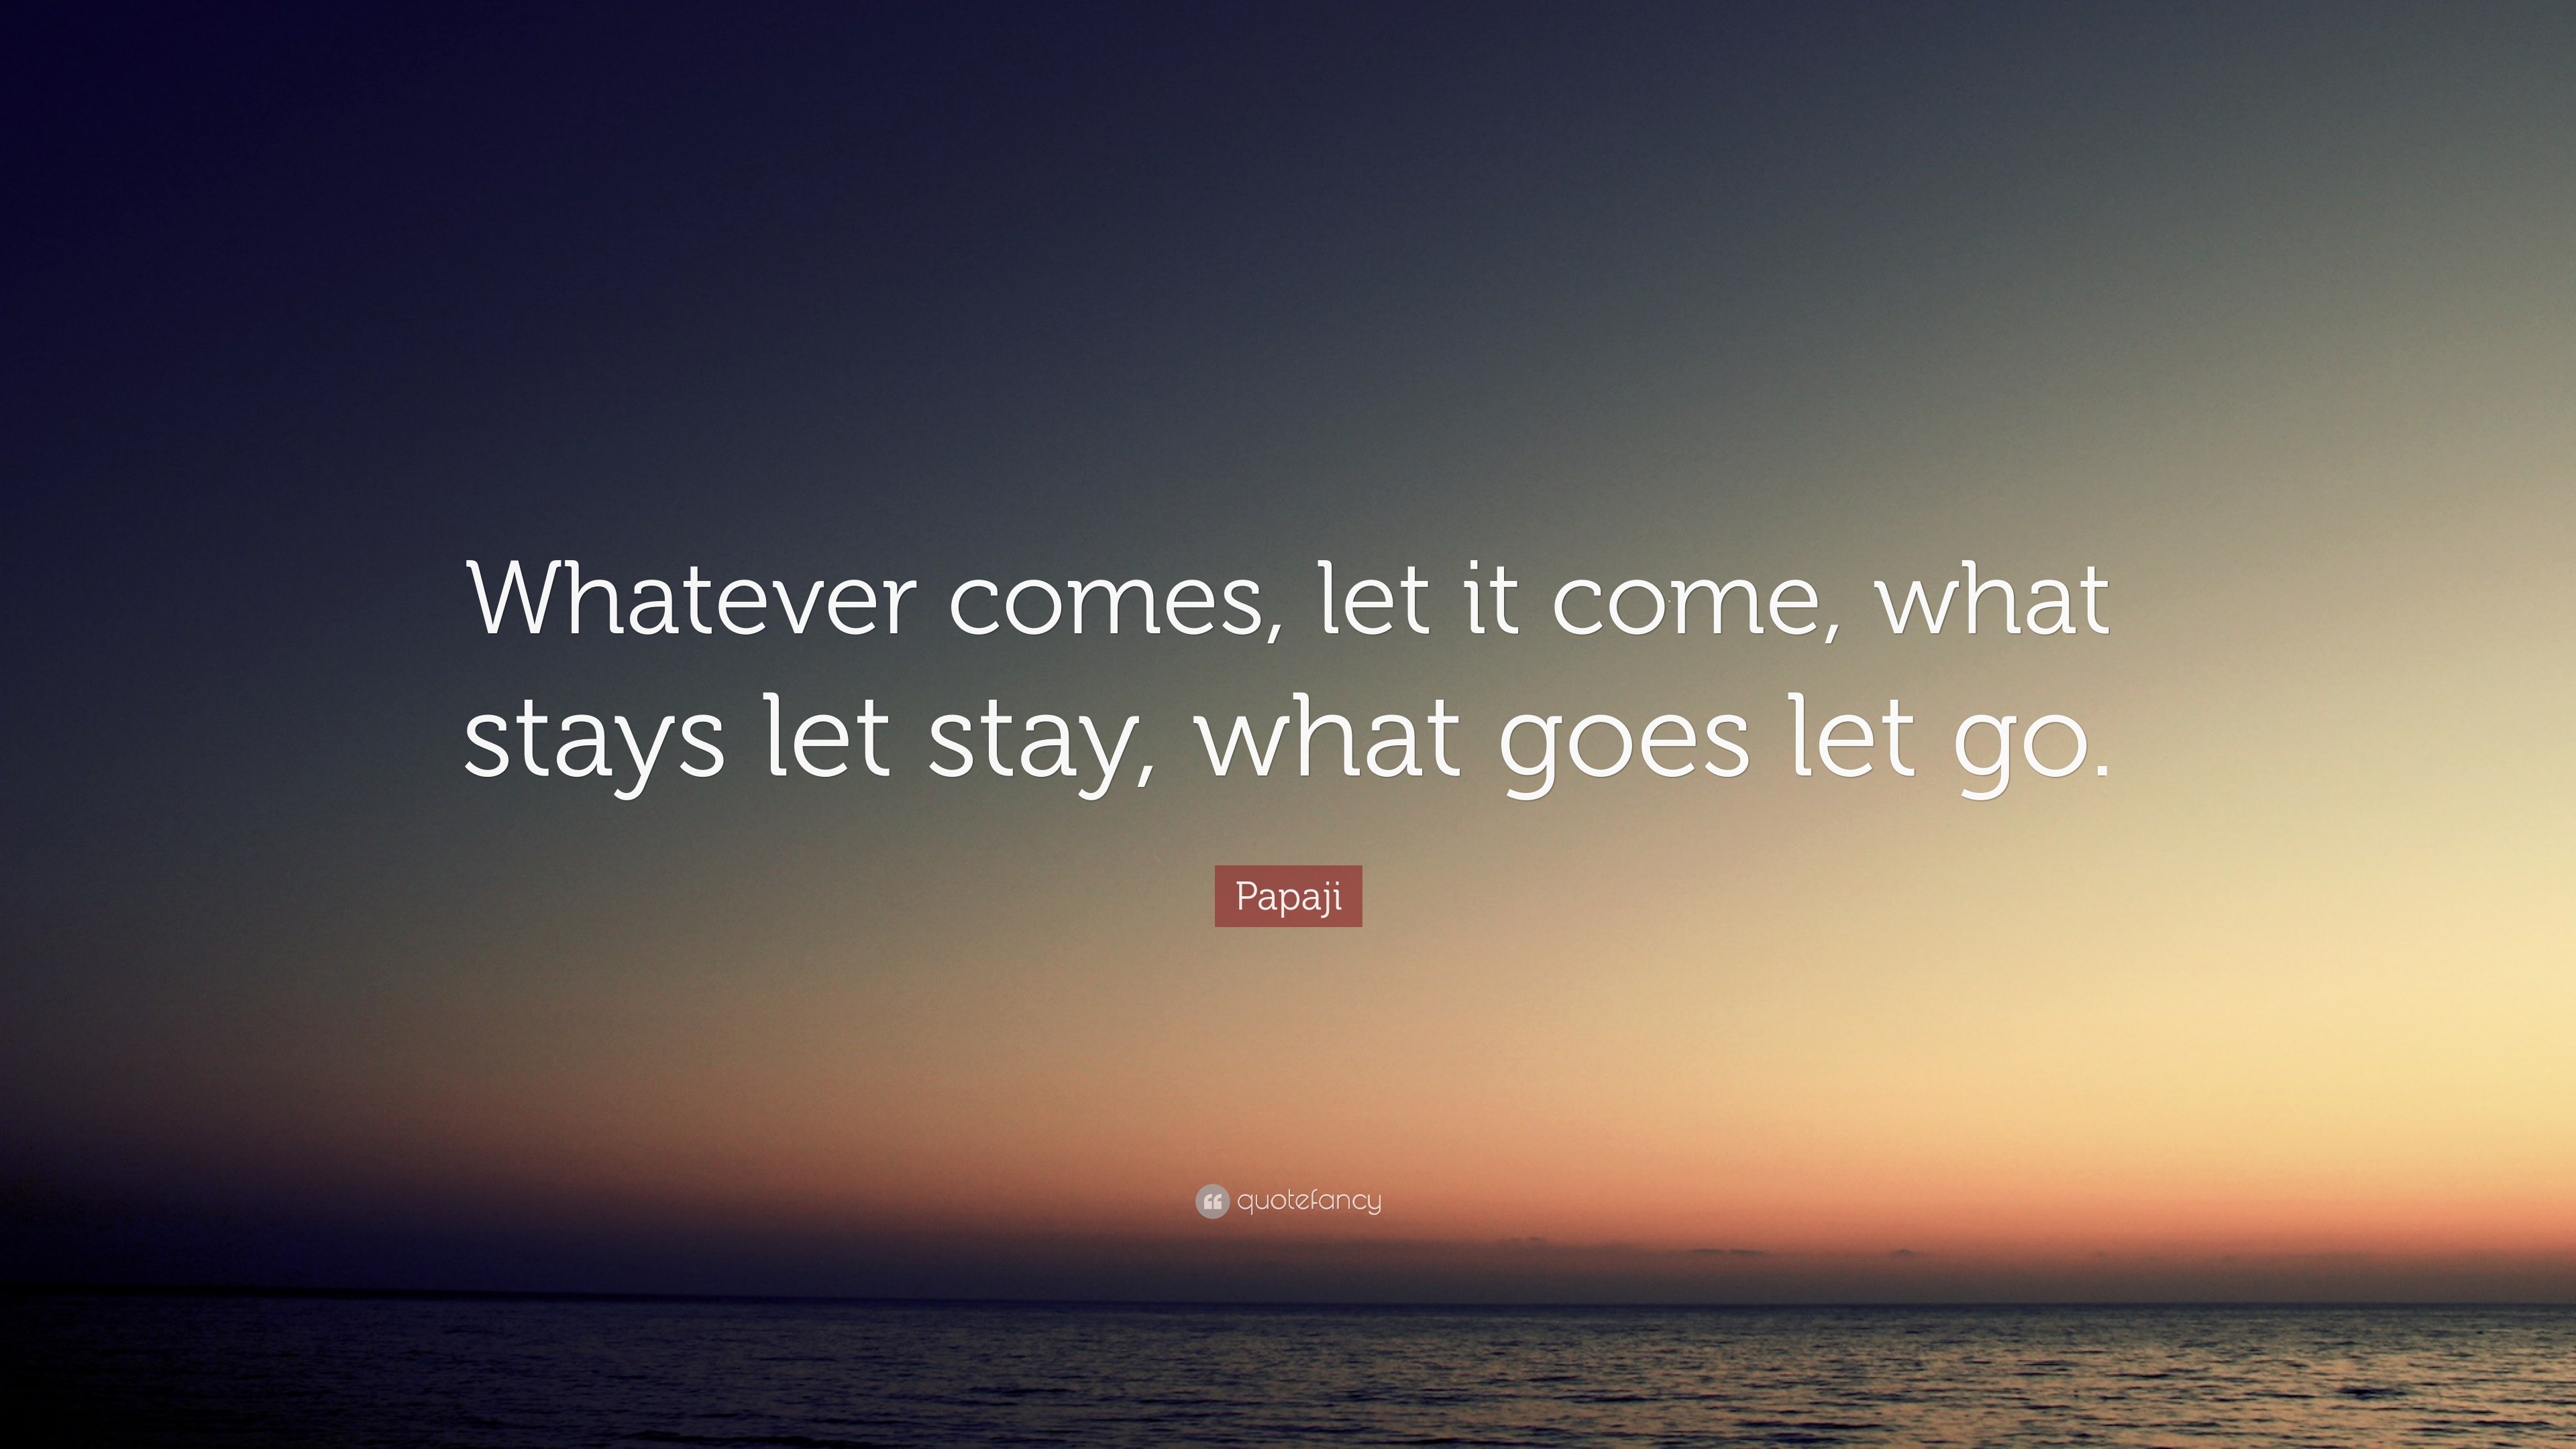 Papaji Quote: “Whatever comes, let it come, what stays let stay, what ...